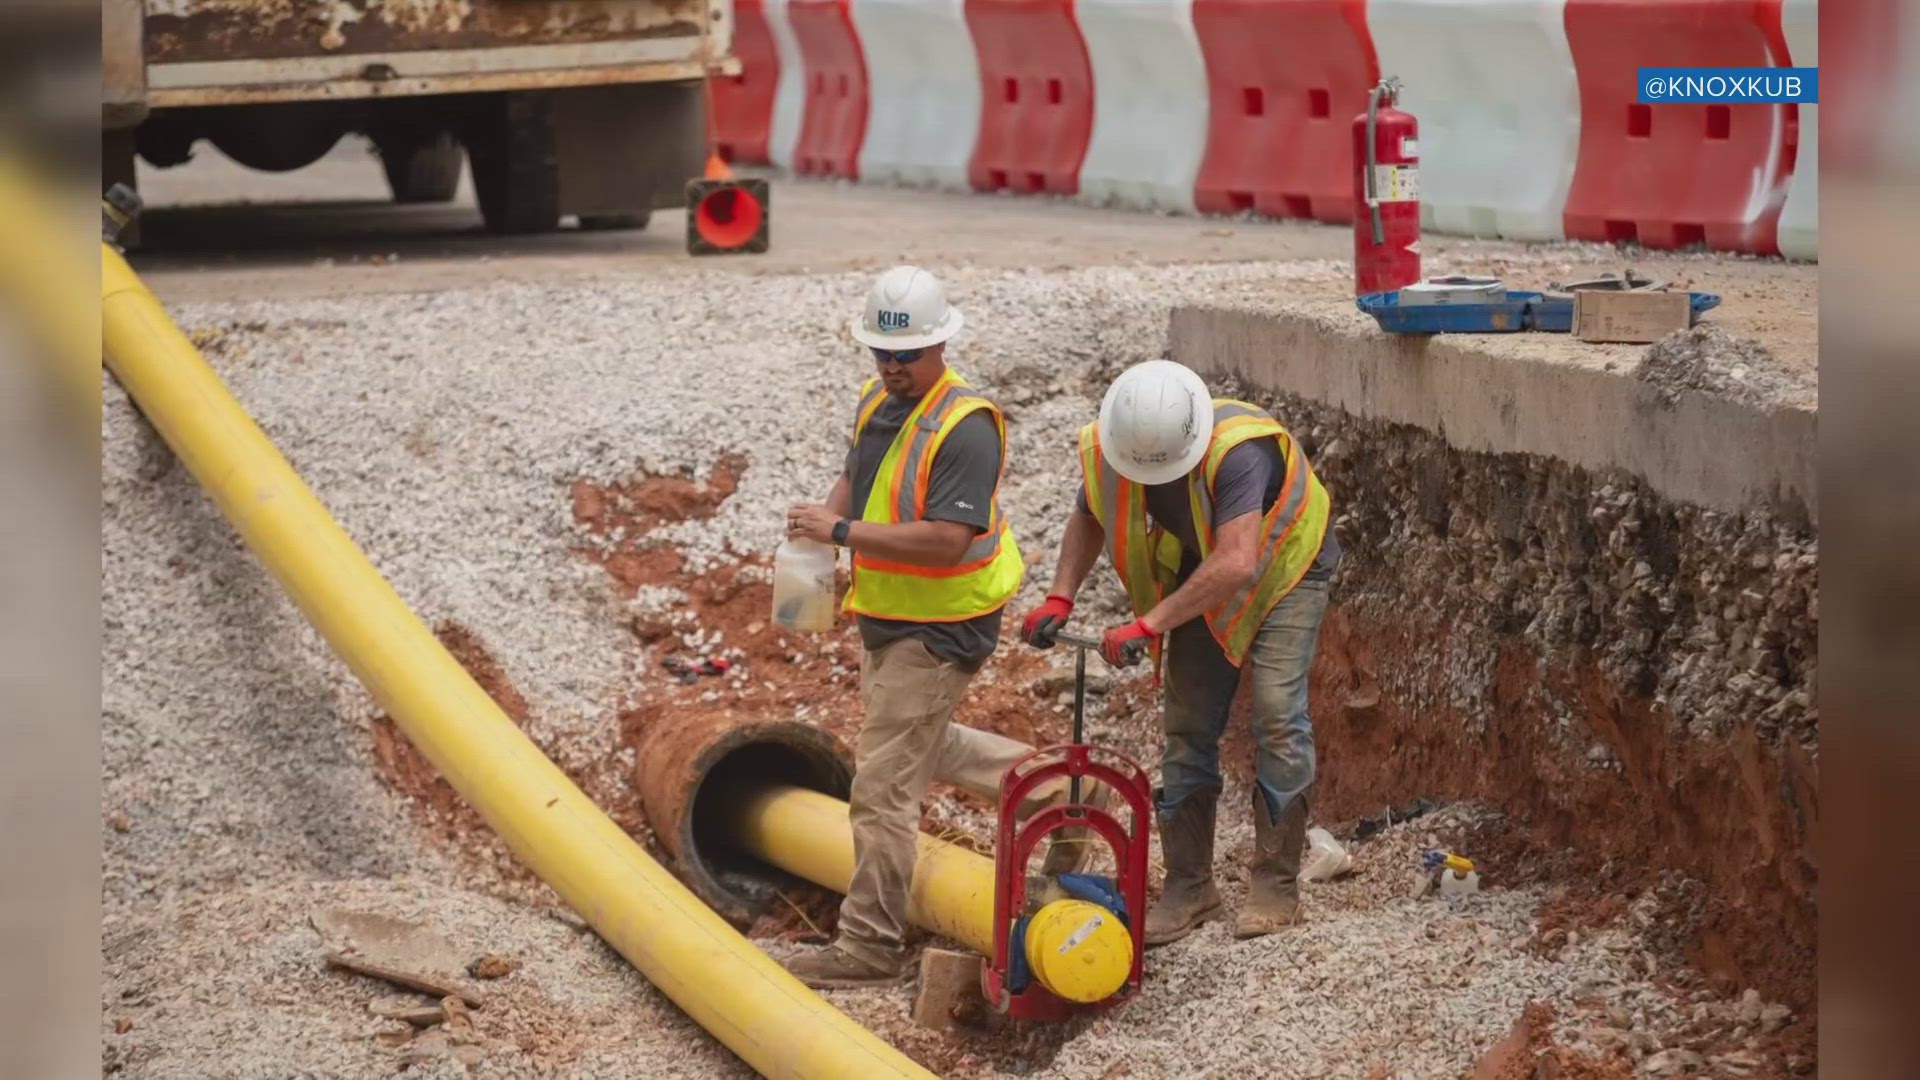 The Knoxville Utilities Board said crews had already replaced a large water main and got creative for the new natural gas line.